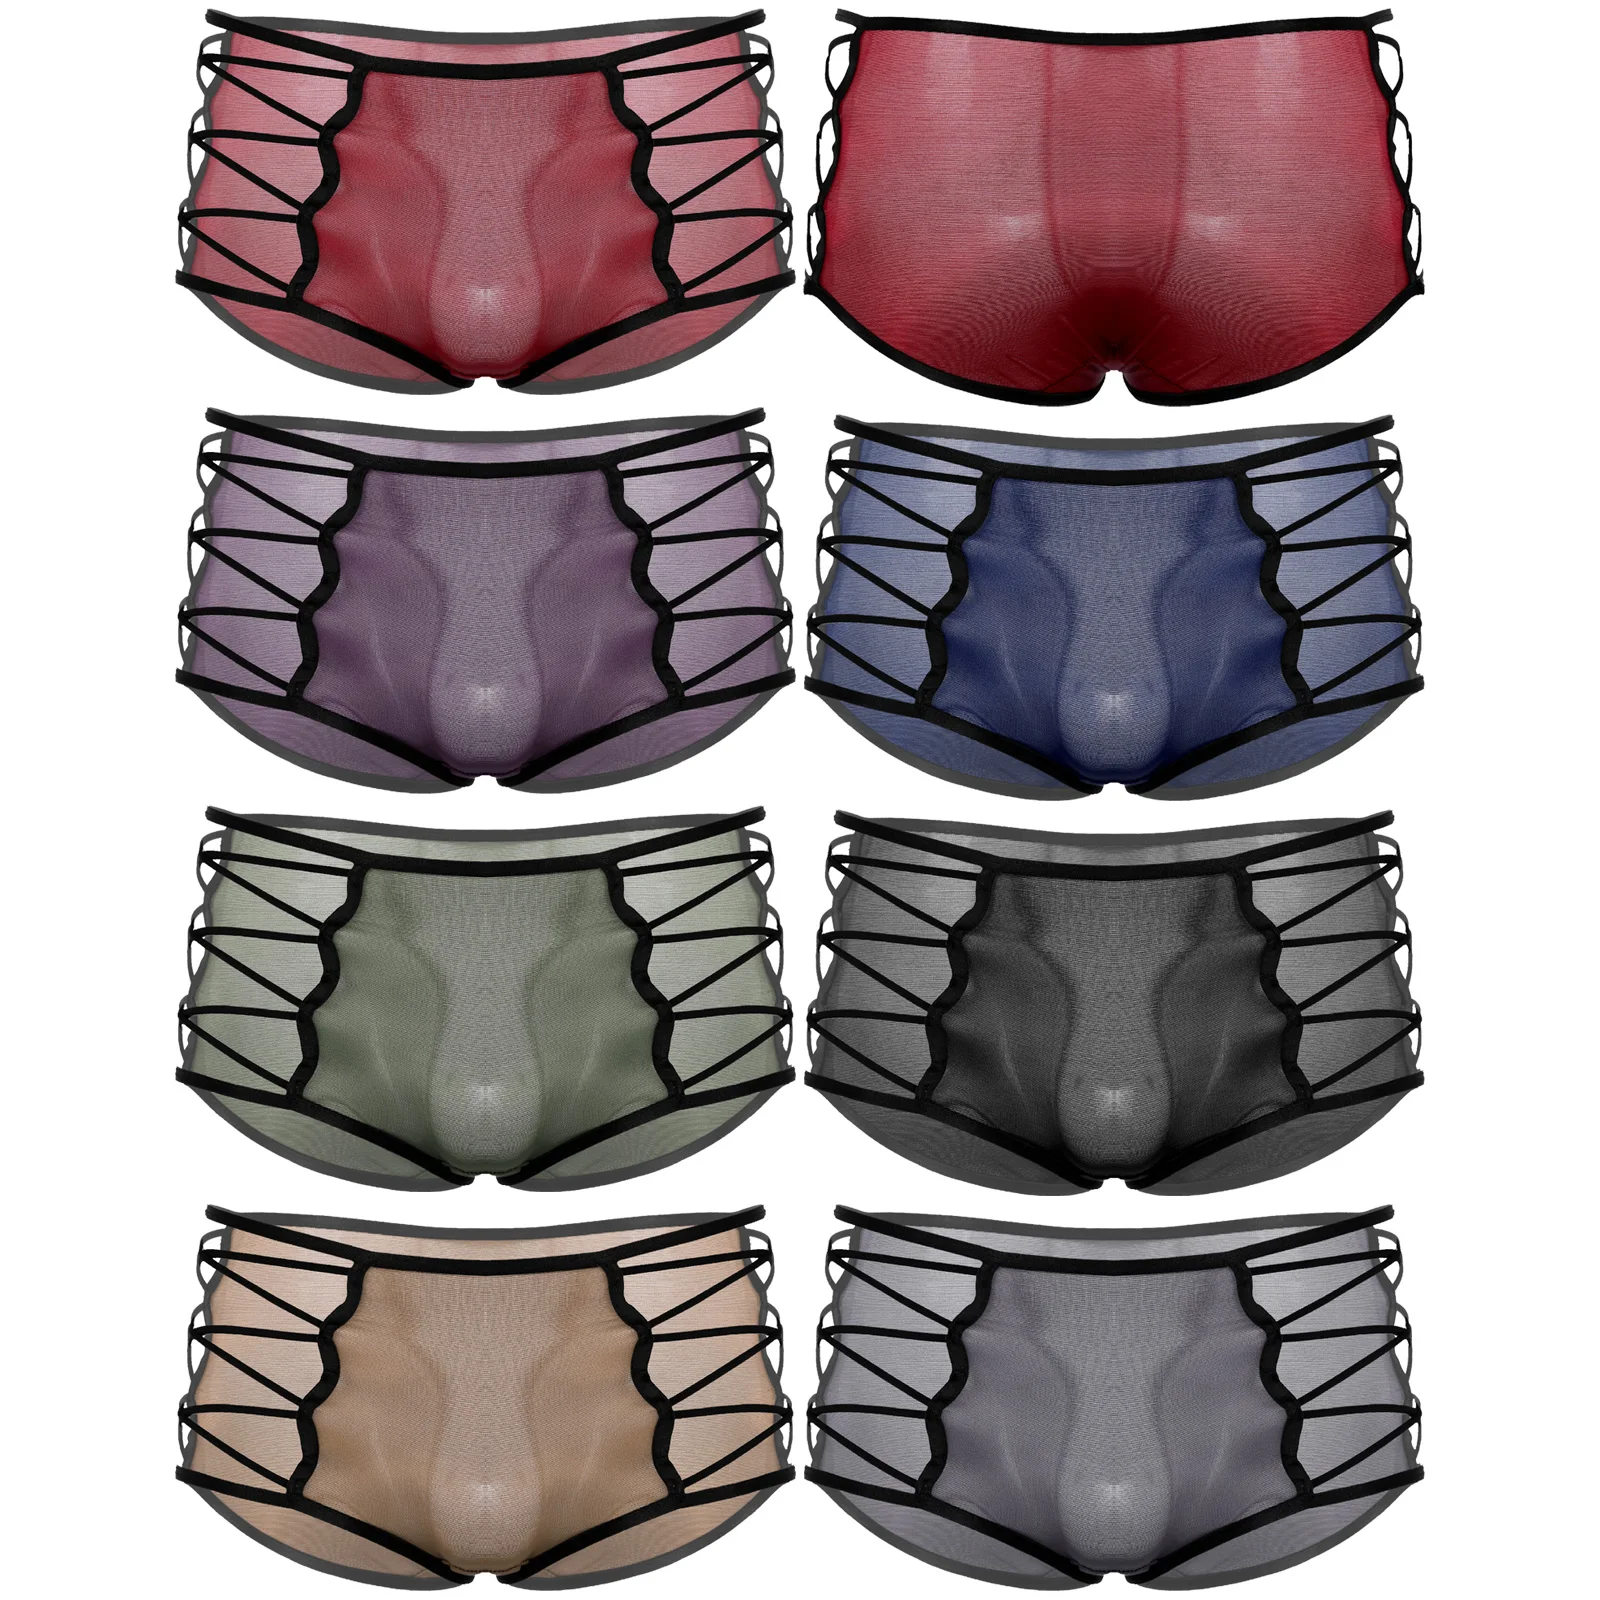 Sexy Mens Sissy Lingerie Semi-see Through Crisscross Side Briefs Hollow Out Silky Panties Mid Waist Elastic Waistband Underwear womens boxer shorts